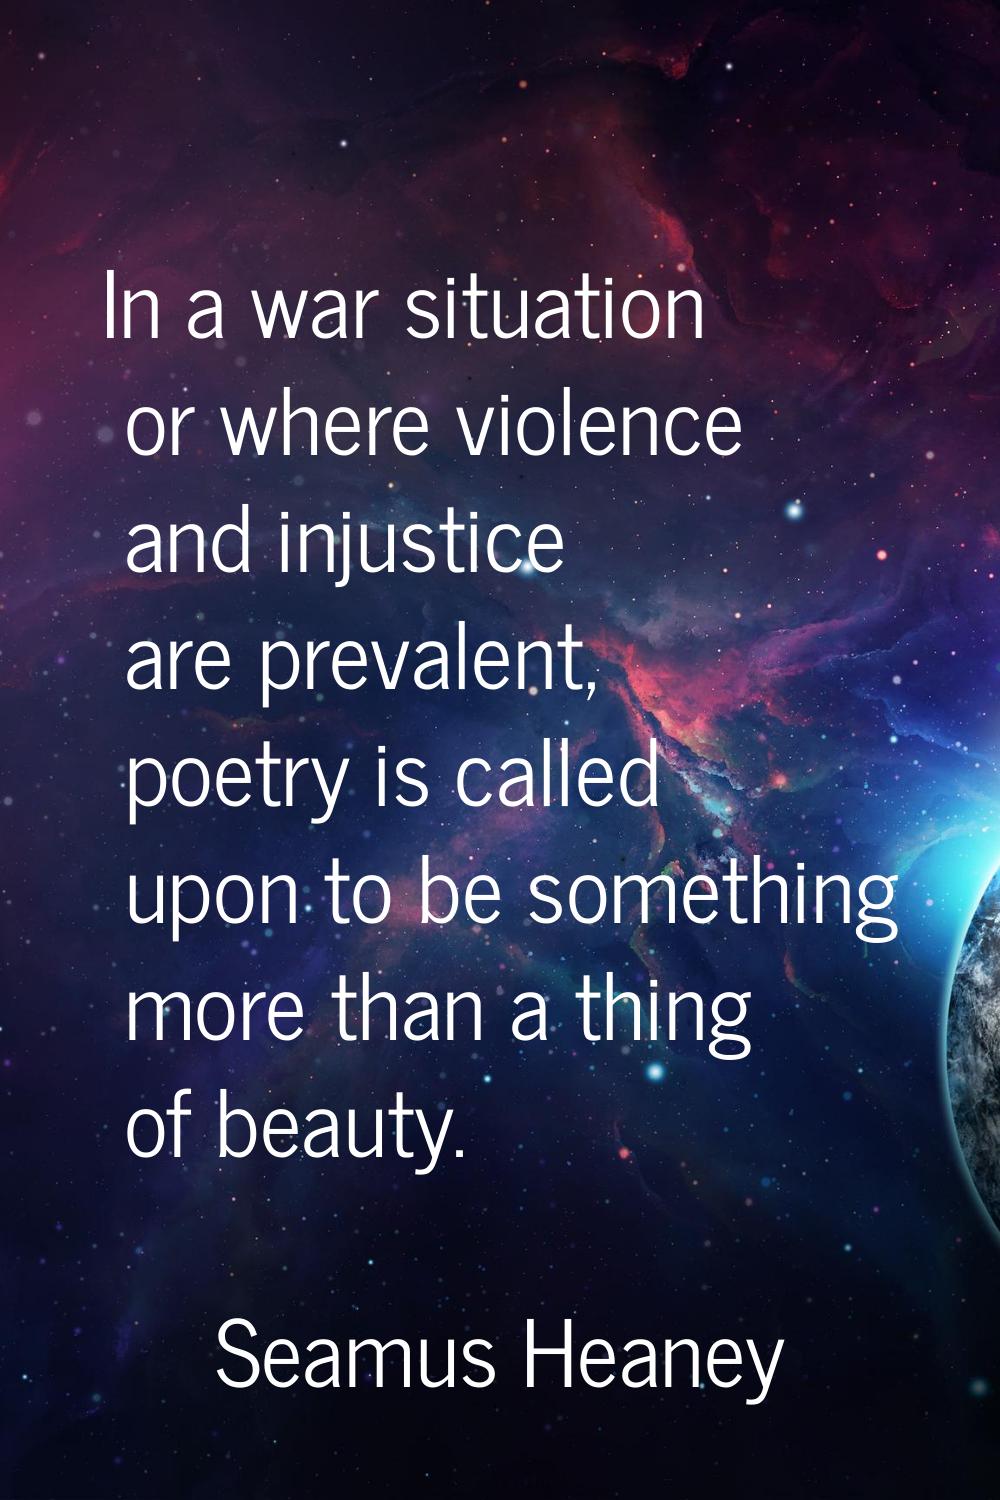 In a war situation or where violence and injustice are prevalent, poetry is called upon to be somet